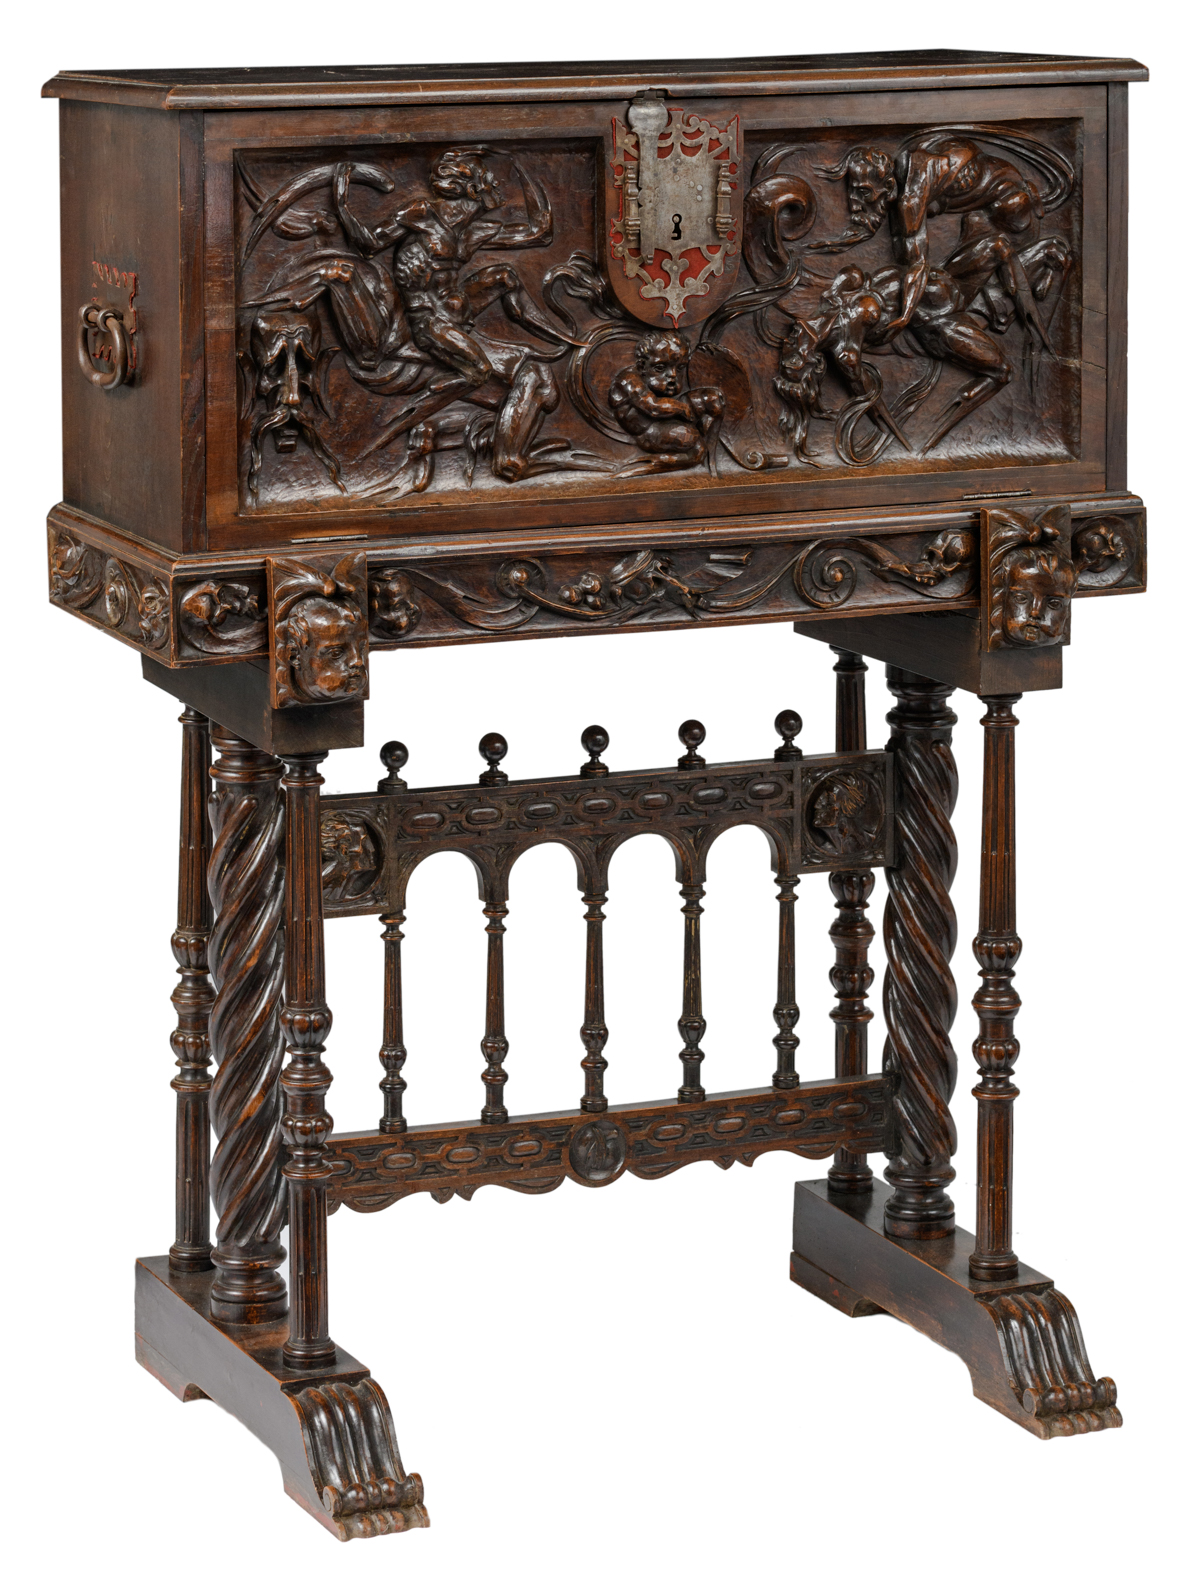 A richly alto relievo carved walnut and oak vargueno, 19thC Renaissance Revival,  H 57,5 - 143 (with